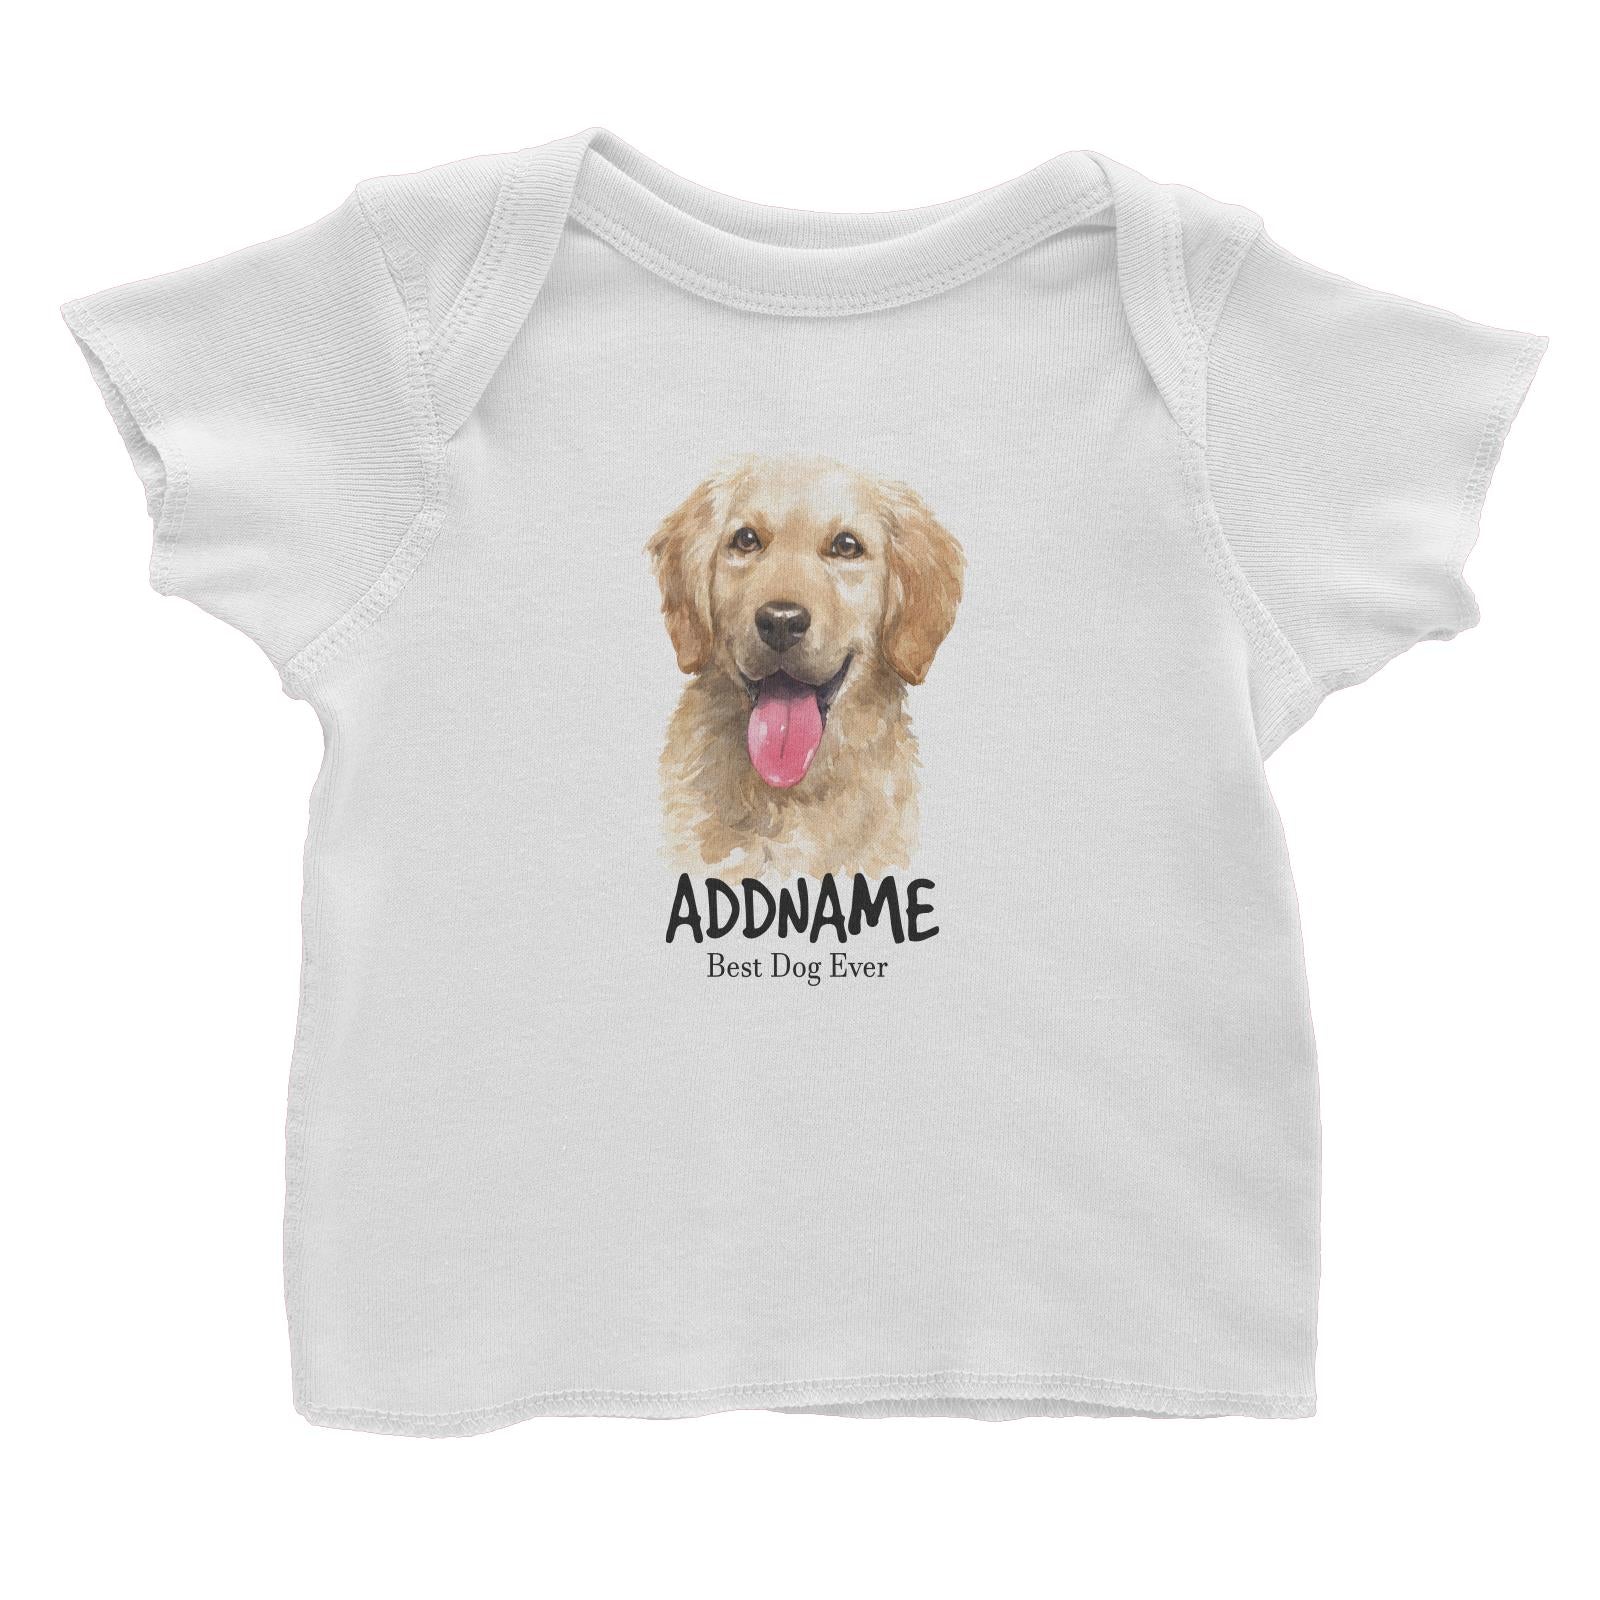 Watercolor Dog Golden Retriever Smile Best Dog Ever Addname Baby T-Shirt